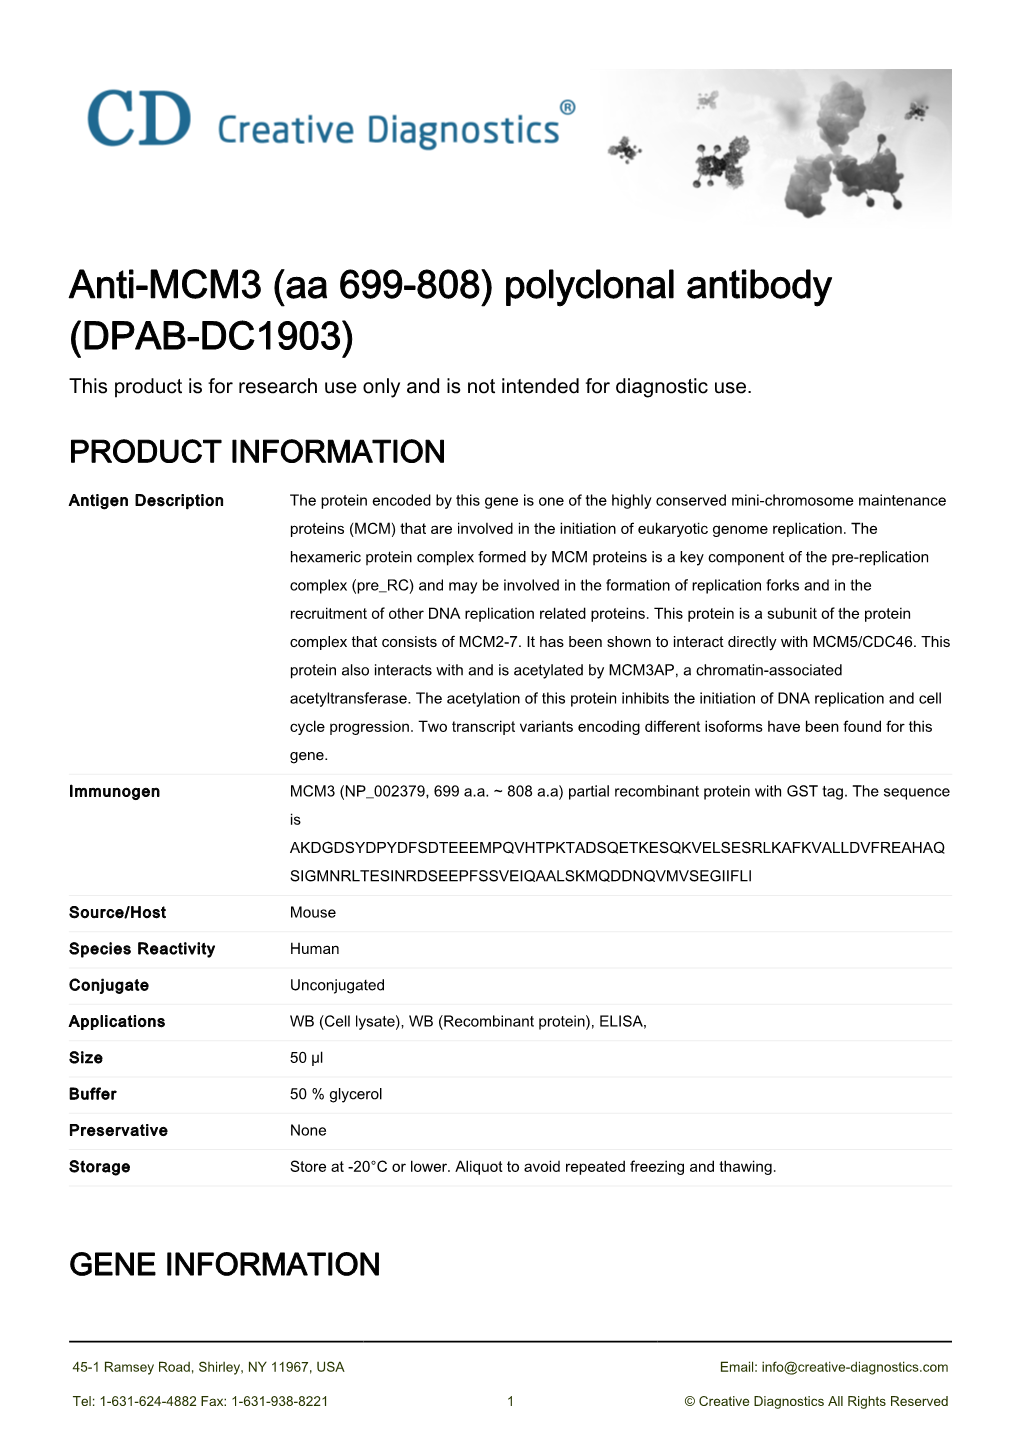 Anti-MCM3 (Aa 699-808) Polyclonal Antibody (DPAB-DC1903) This Product Is for Research Use Only and Is Not Intended for Diagnostic Use